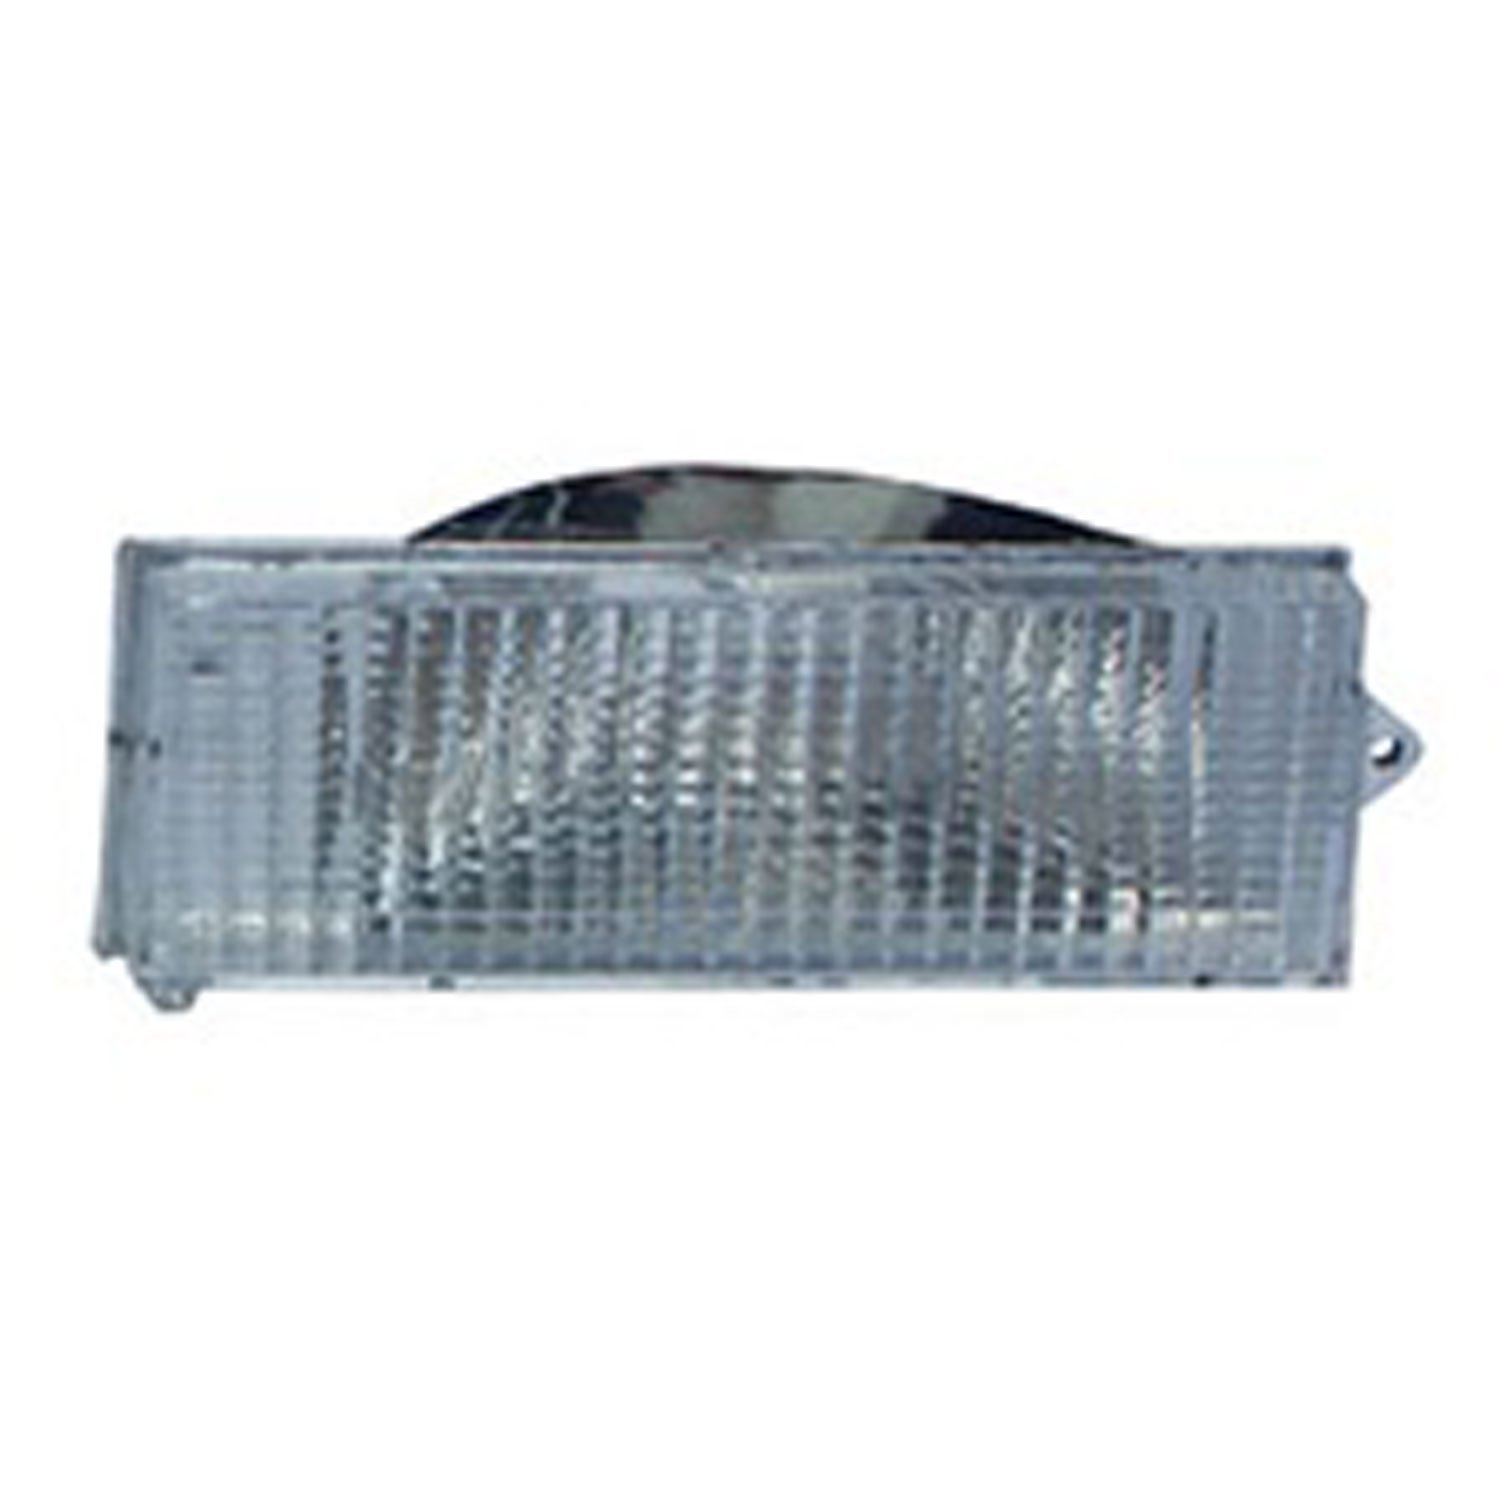 Replacement parking lamp from Omix-ADA, Fits right side on 84-96 Jeep Cherokee XJ